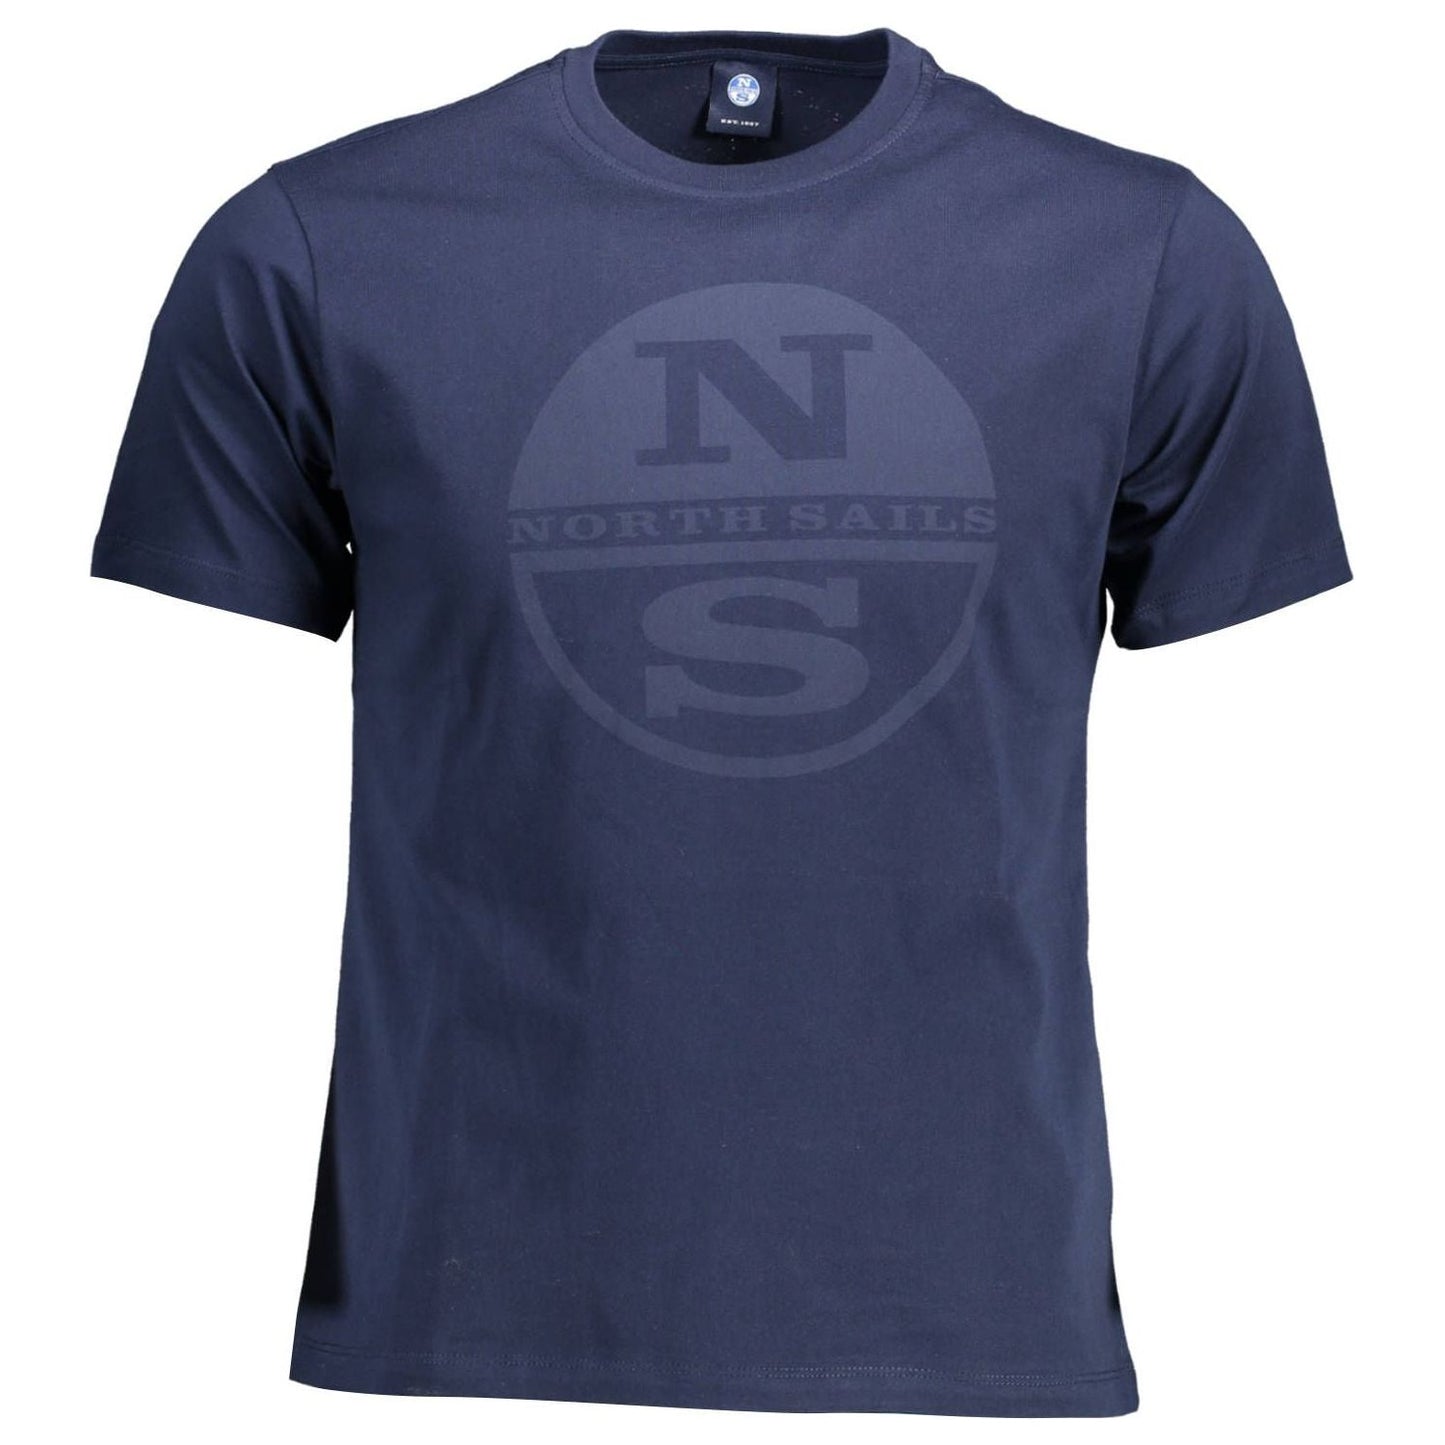 North Sails Chic Blue Nautical Print Tee for Men chic-blue-nautical-print-tee-for-men